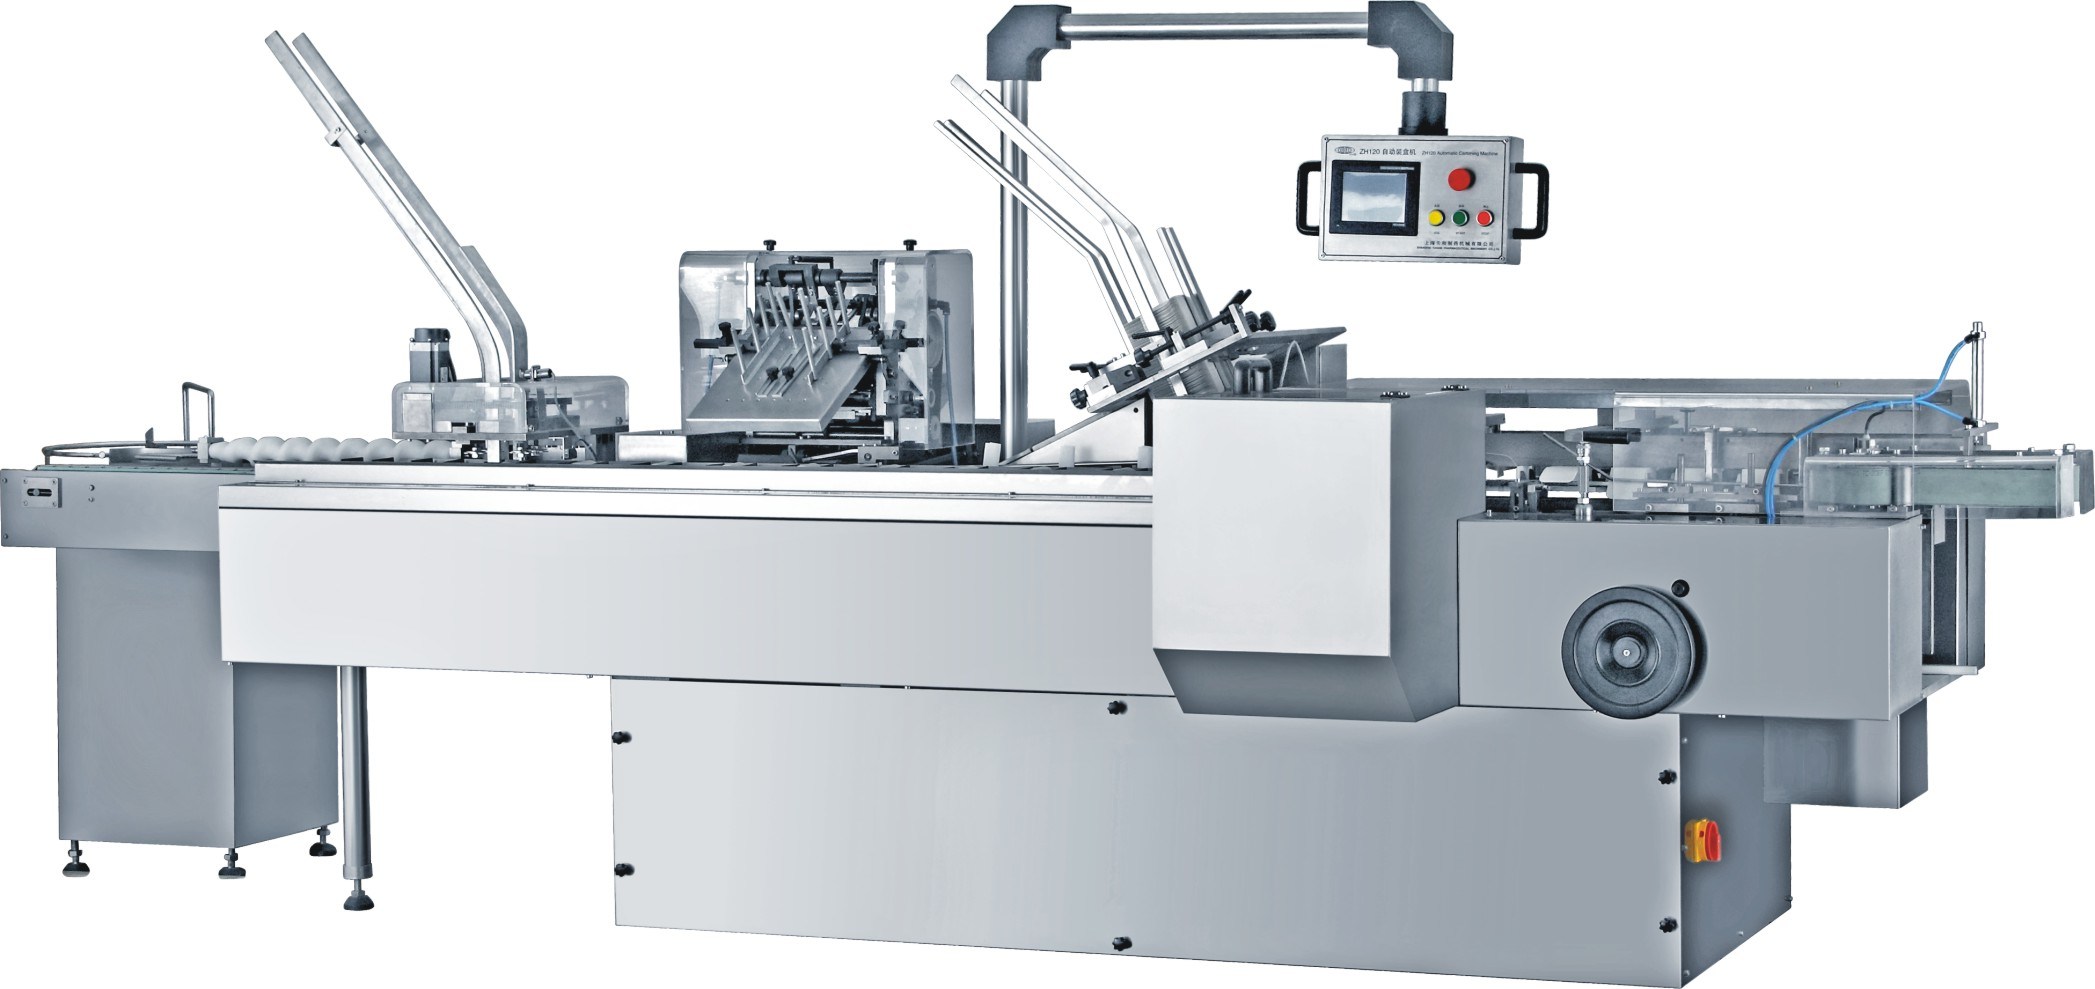 What are the things to keep in mind while choosing a cartoning machine manufacturer?